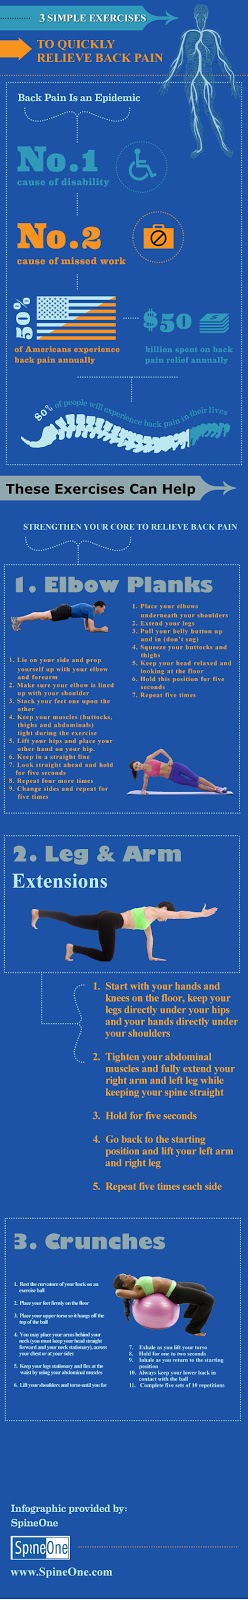 Infographic: Three Simple Exercises to Relieve Back Pain